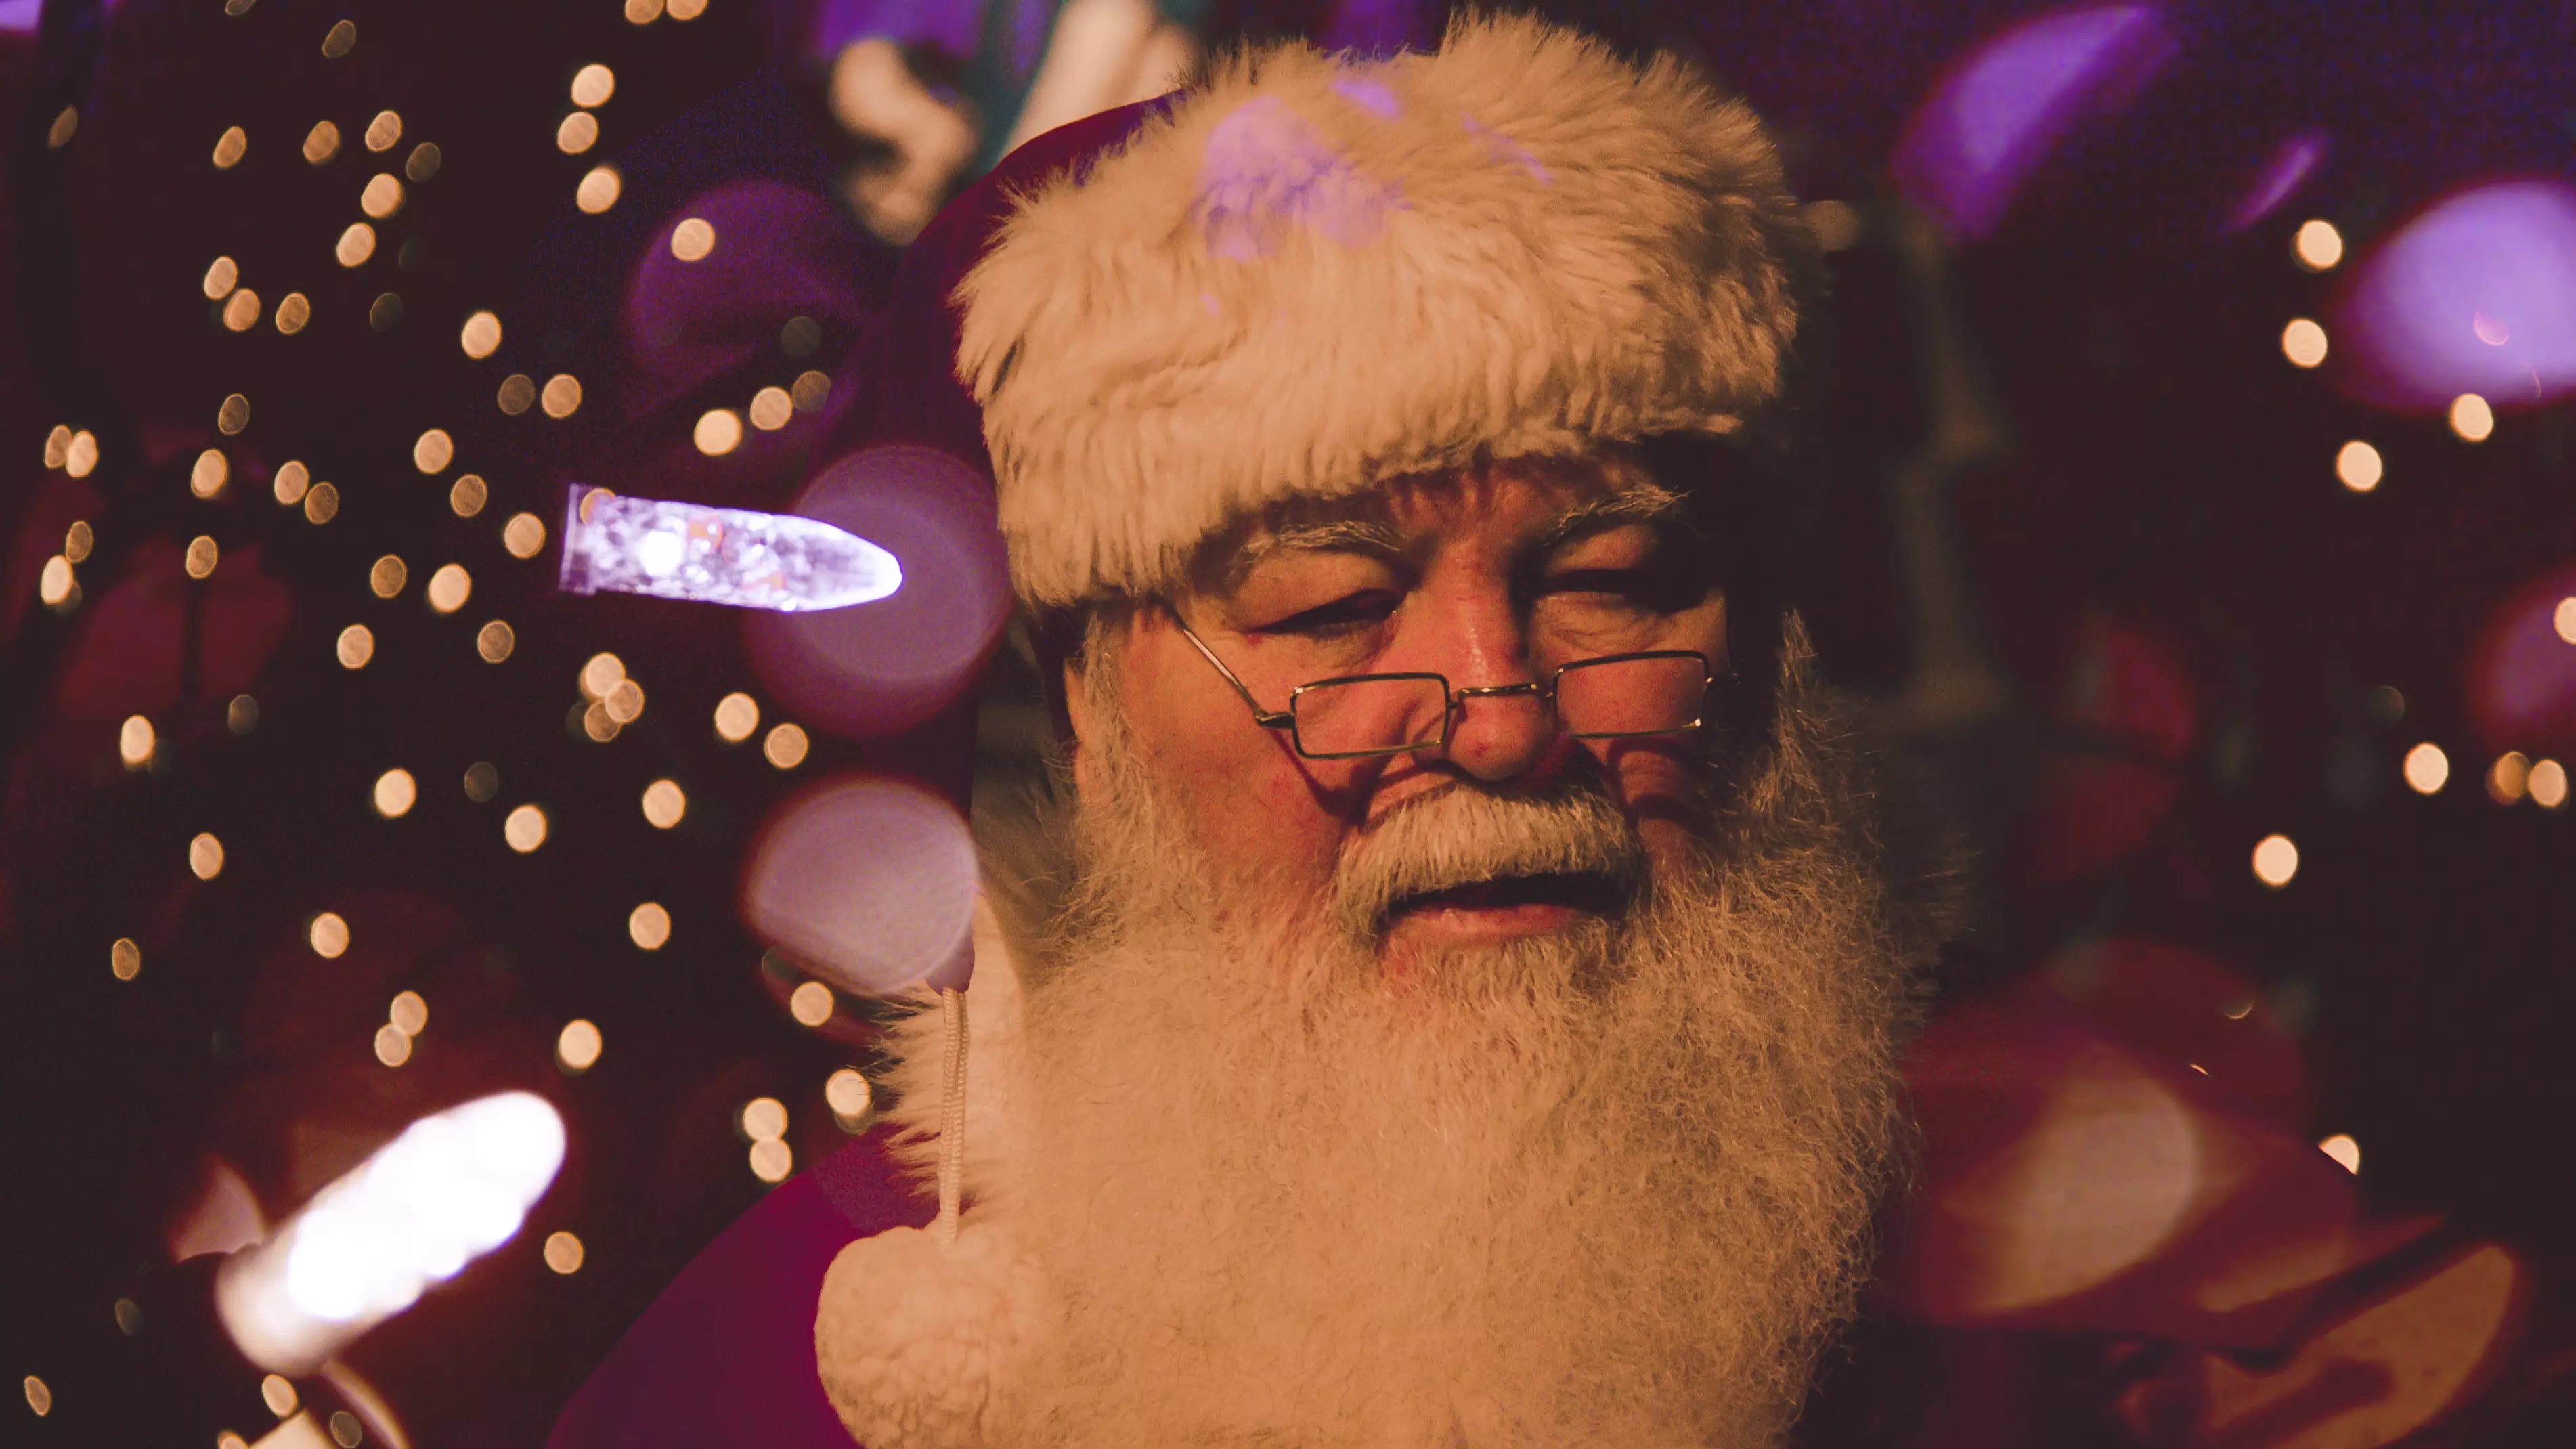 Forget Visiting Santa: Now You Can Video Call The Big Man Instead